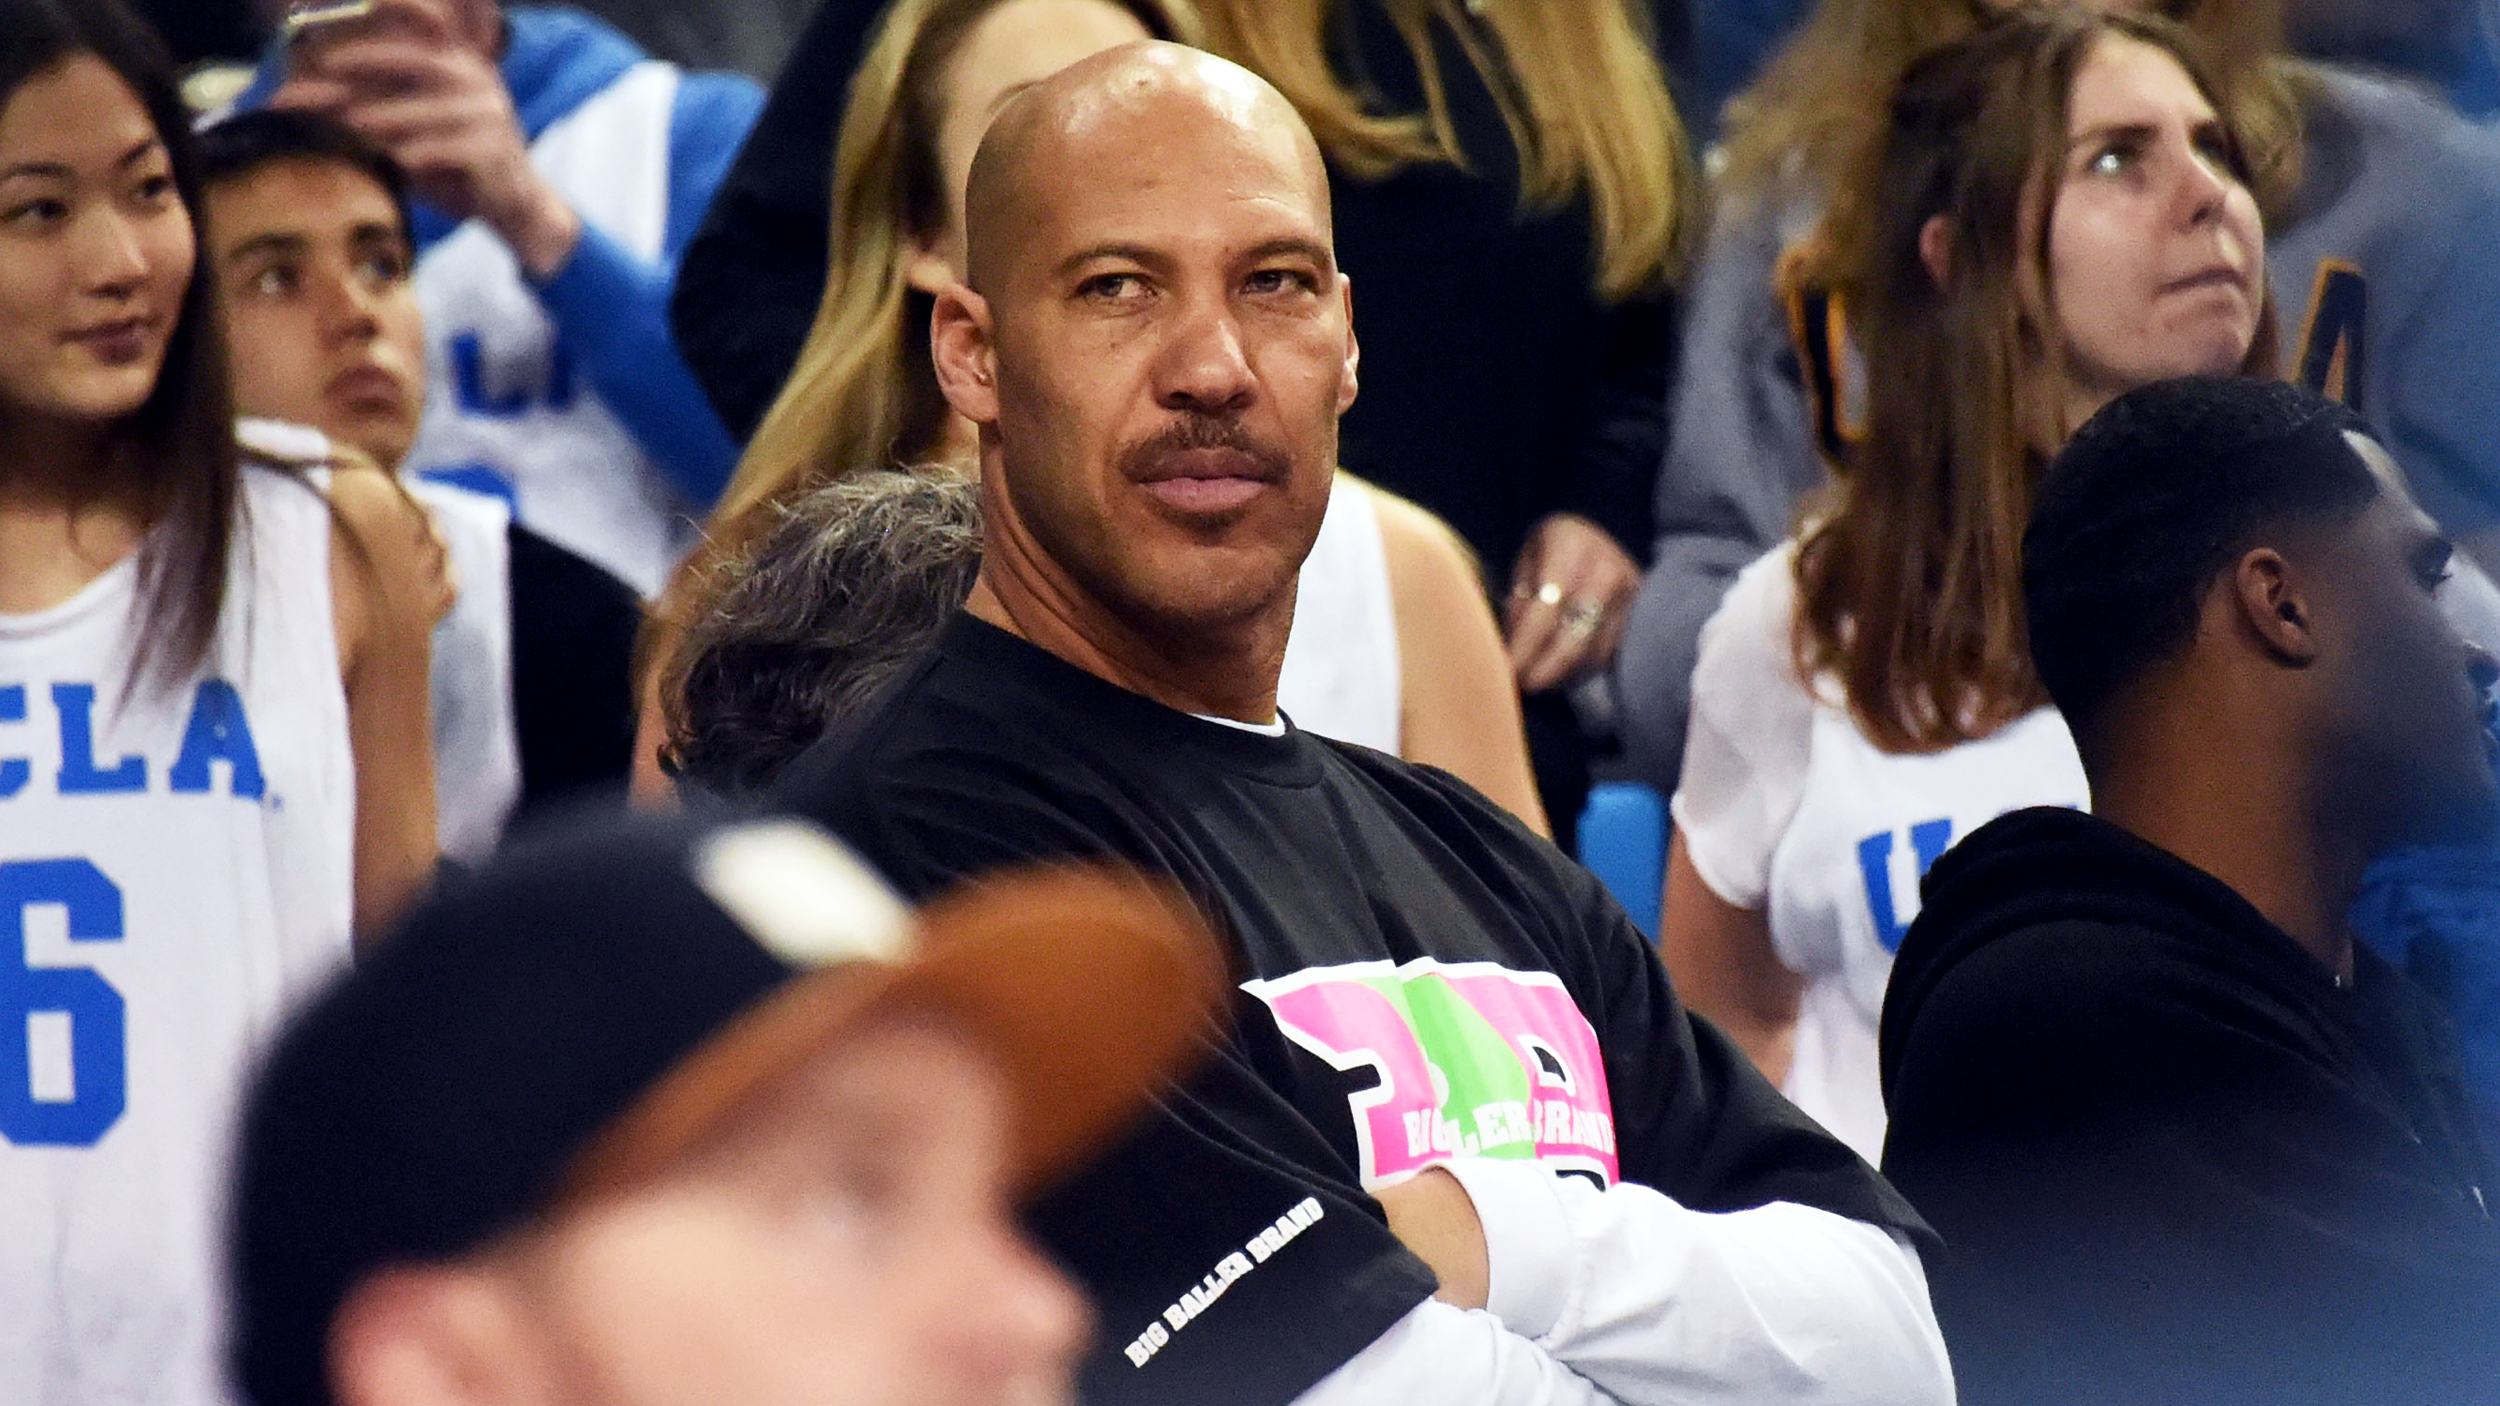 Armour: LaVar Ball is the Pageant Mom who Makes You Cringe